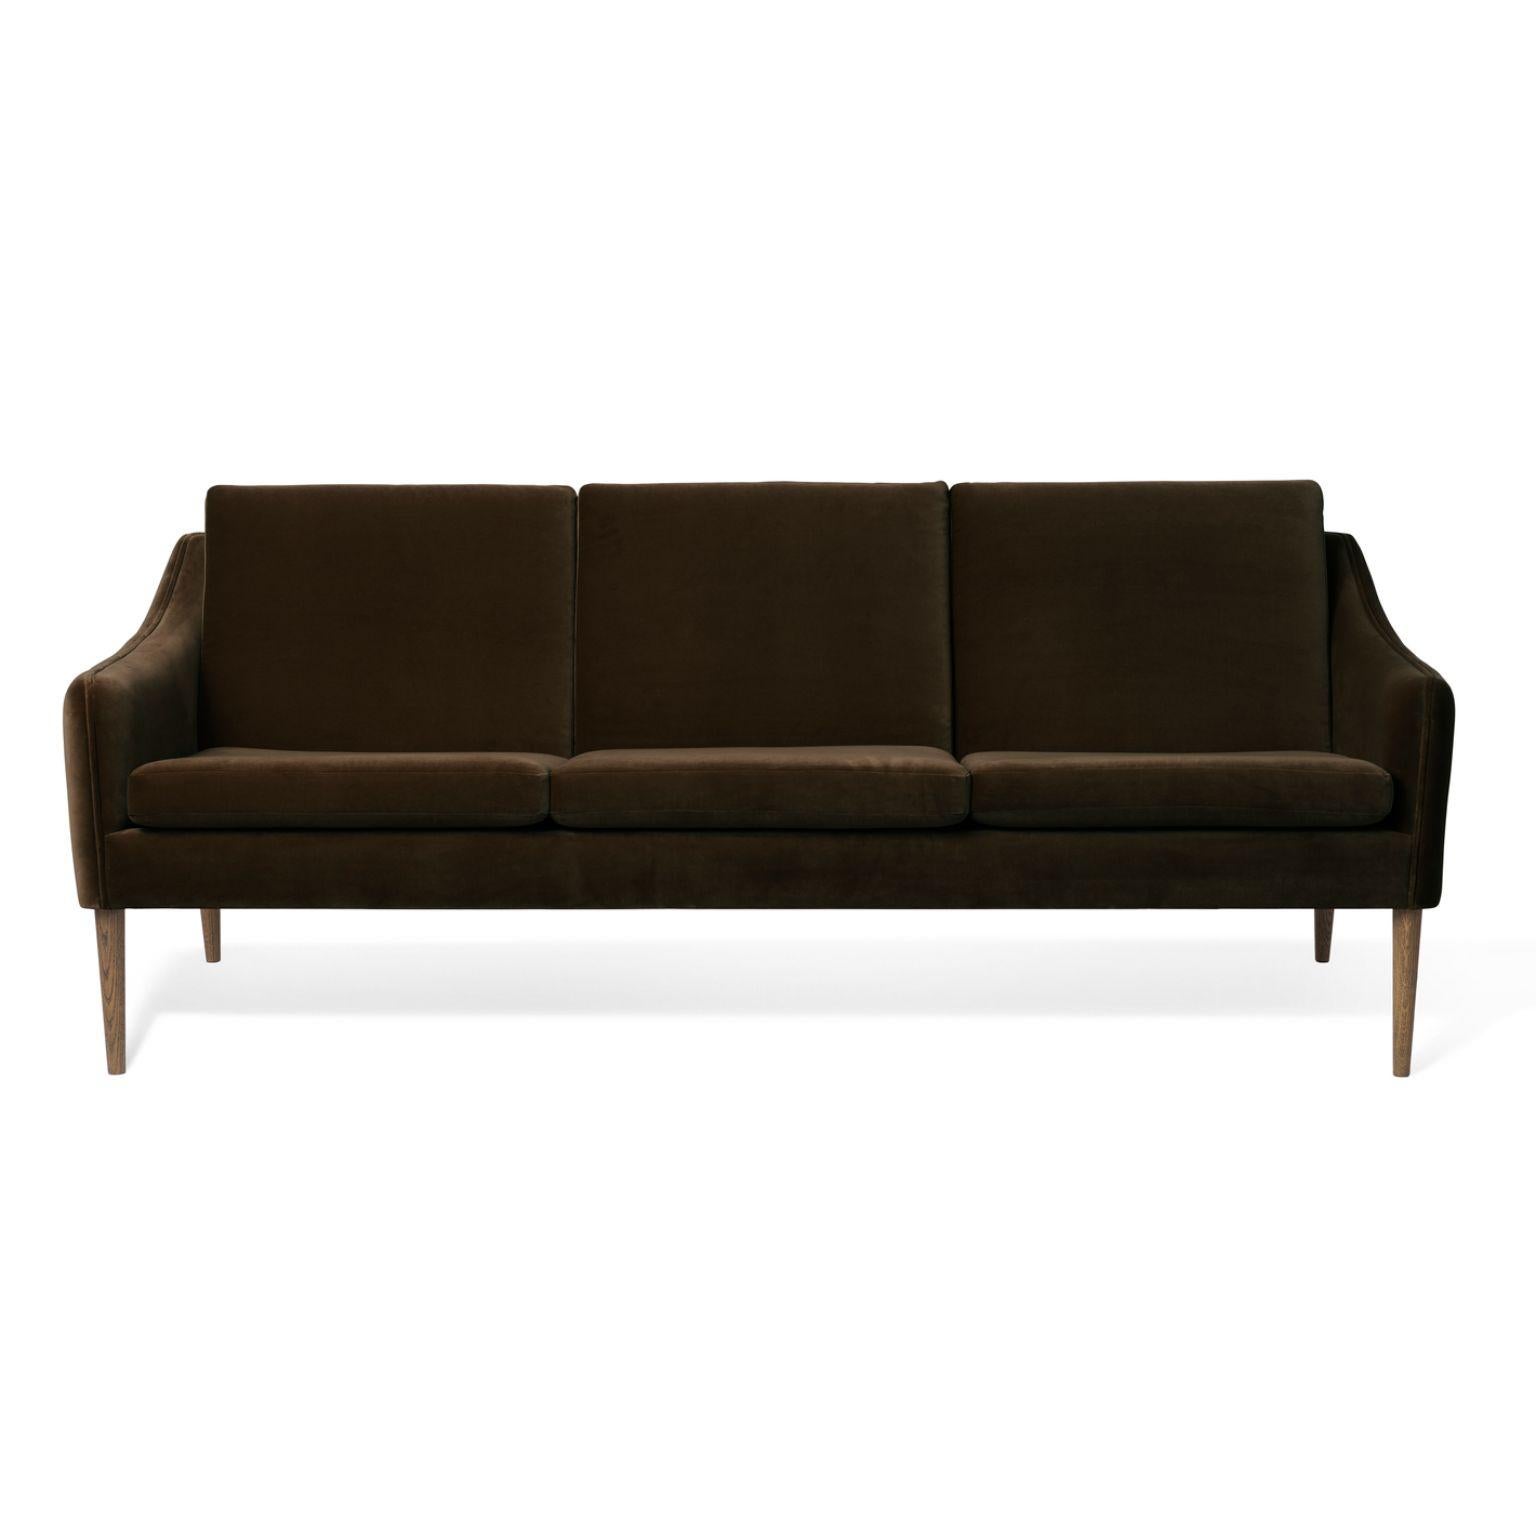 Mr Olsen 3 seater oak java brown by Warm Nordic
Dimensions: D 201 x W 79 x H 78/46 cm
Material: Textile upholstery, foam, spring system, solid oiled oak legs, Solid smoked oak legs
Weight: 50 kg
Also available in different colours and